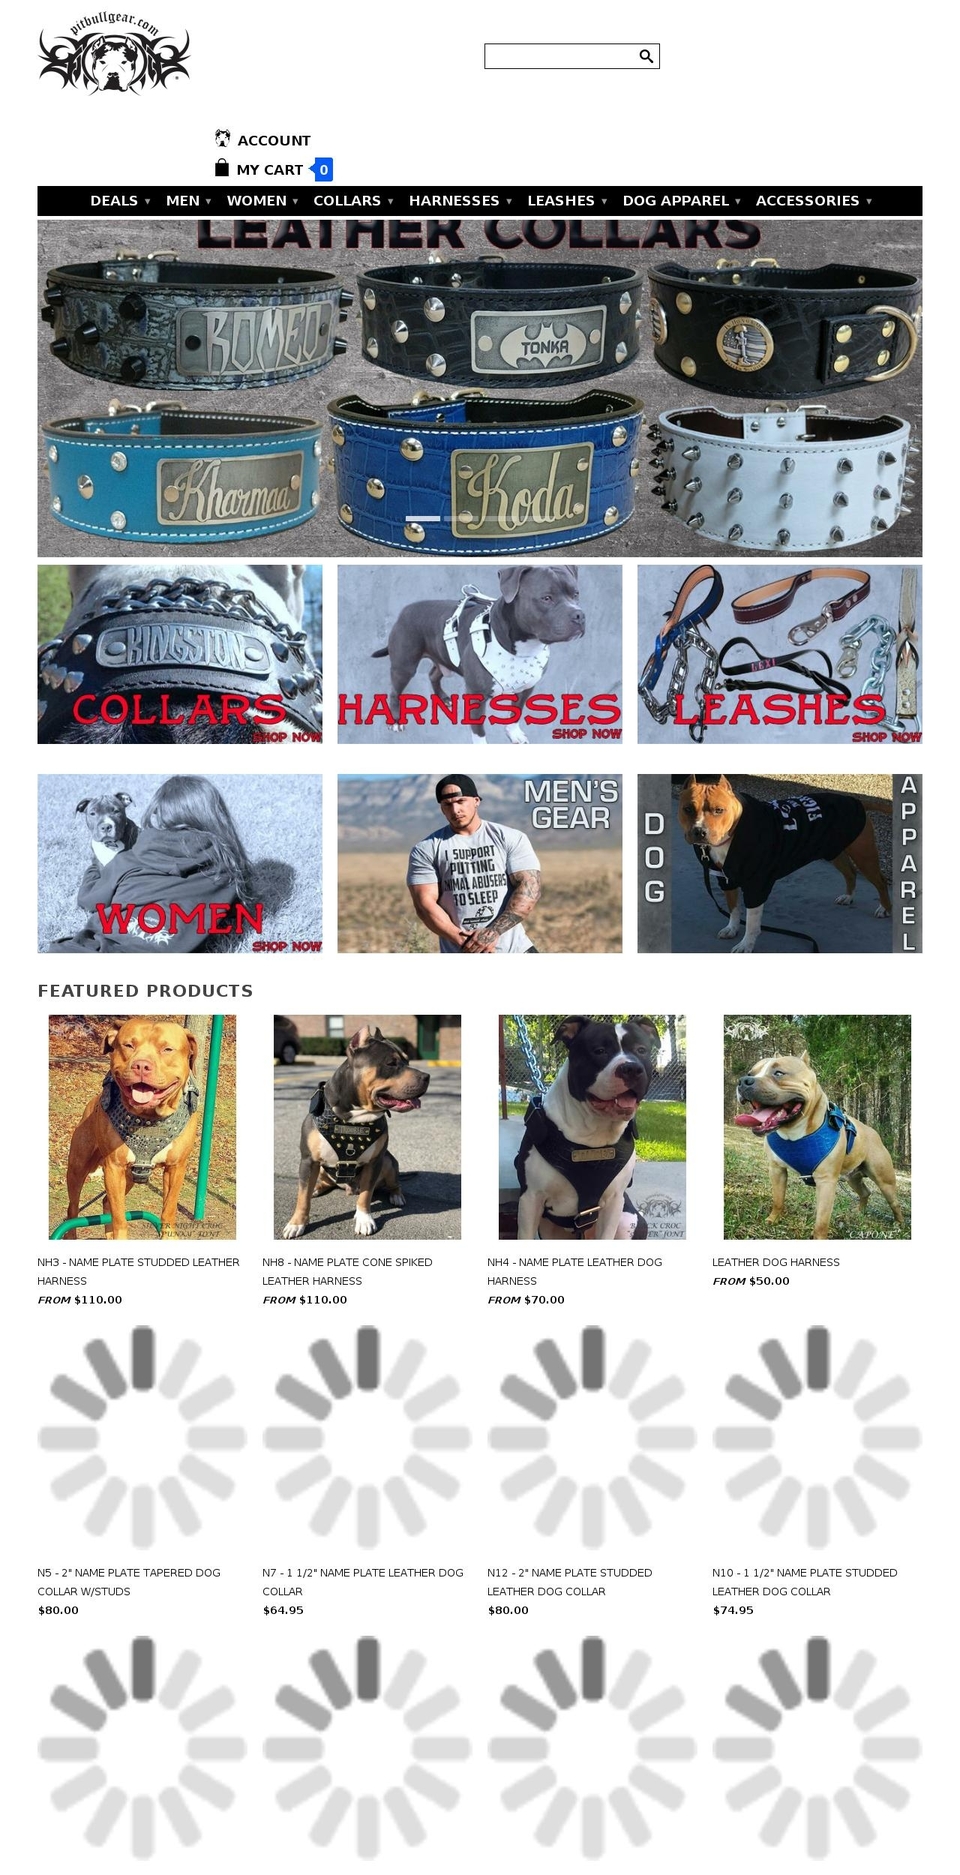 Pit-bull-gear - HC - 1 Dec '16 Shopify theme site example leatherfordogs.com